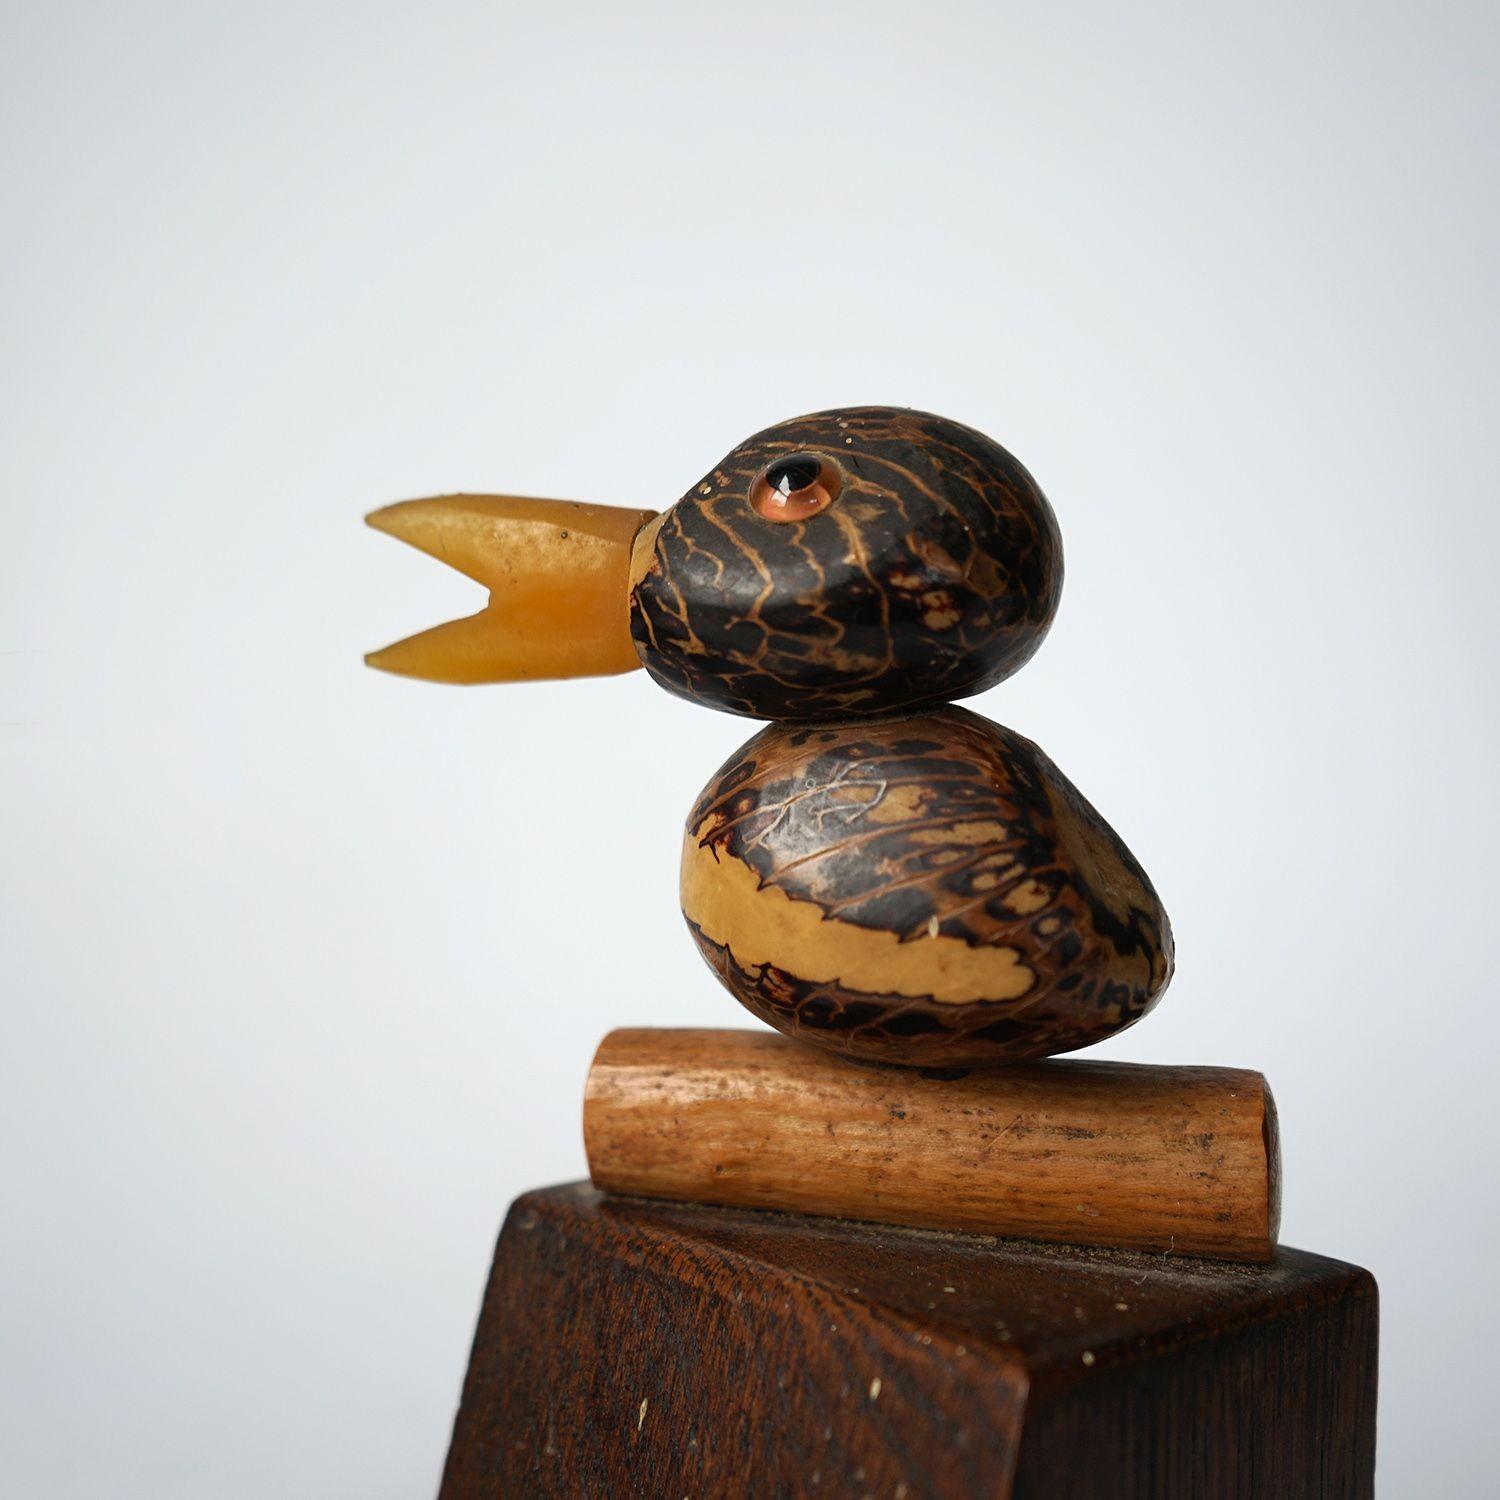 Early 20th Century Yz Nut Bird Bookends by Henry Howell and Co. 1920's